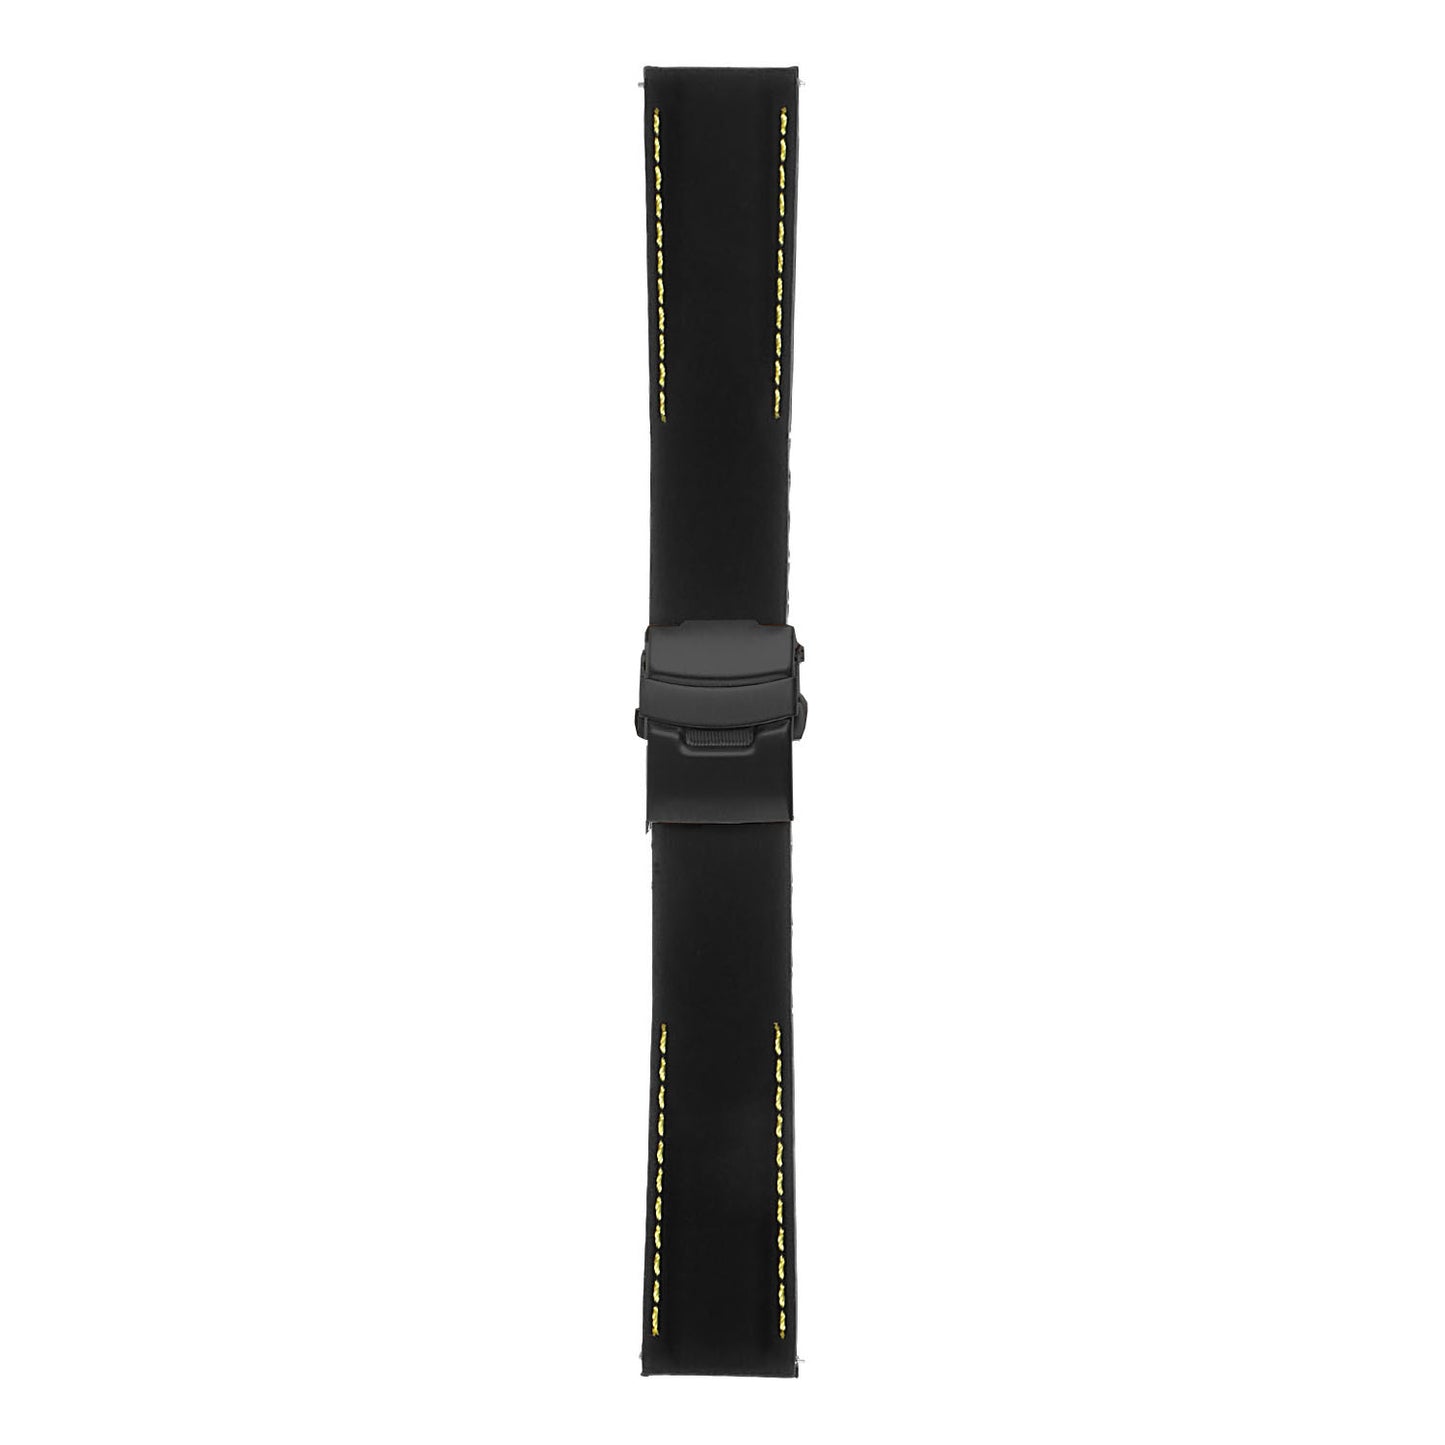 Rubber Strap with Deployant Clasp for Fossil Gen 4 Smartwatch